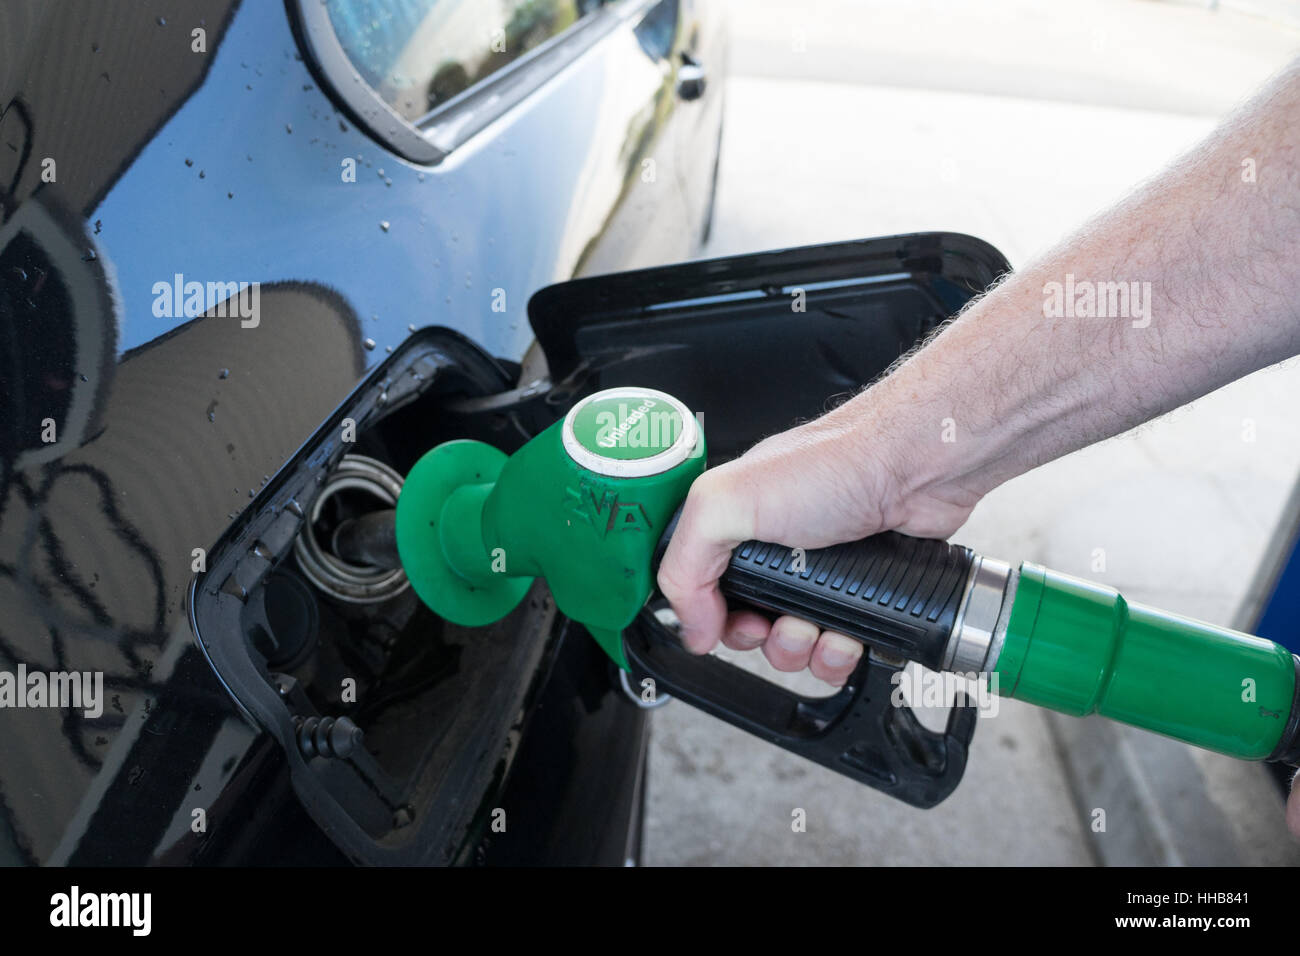 Filling up car with fuel at petrol pump Stock Photo